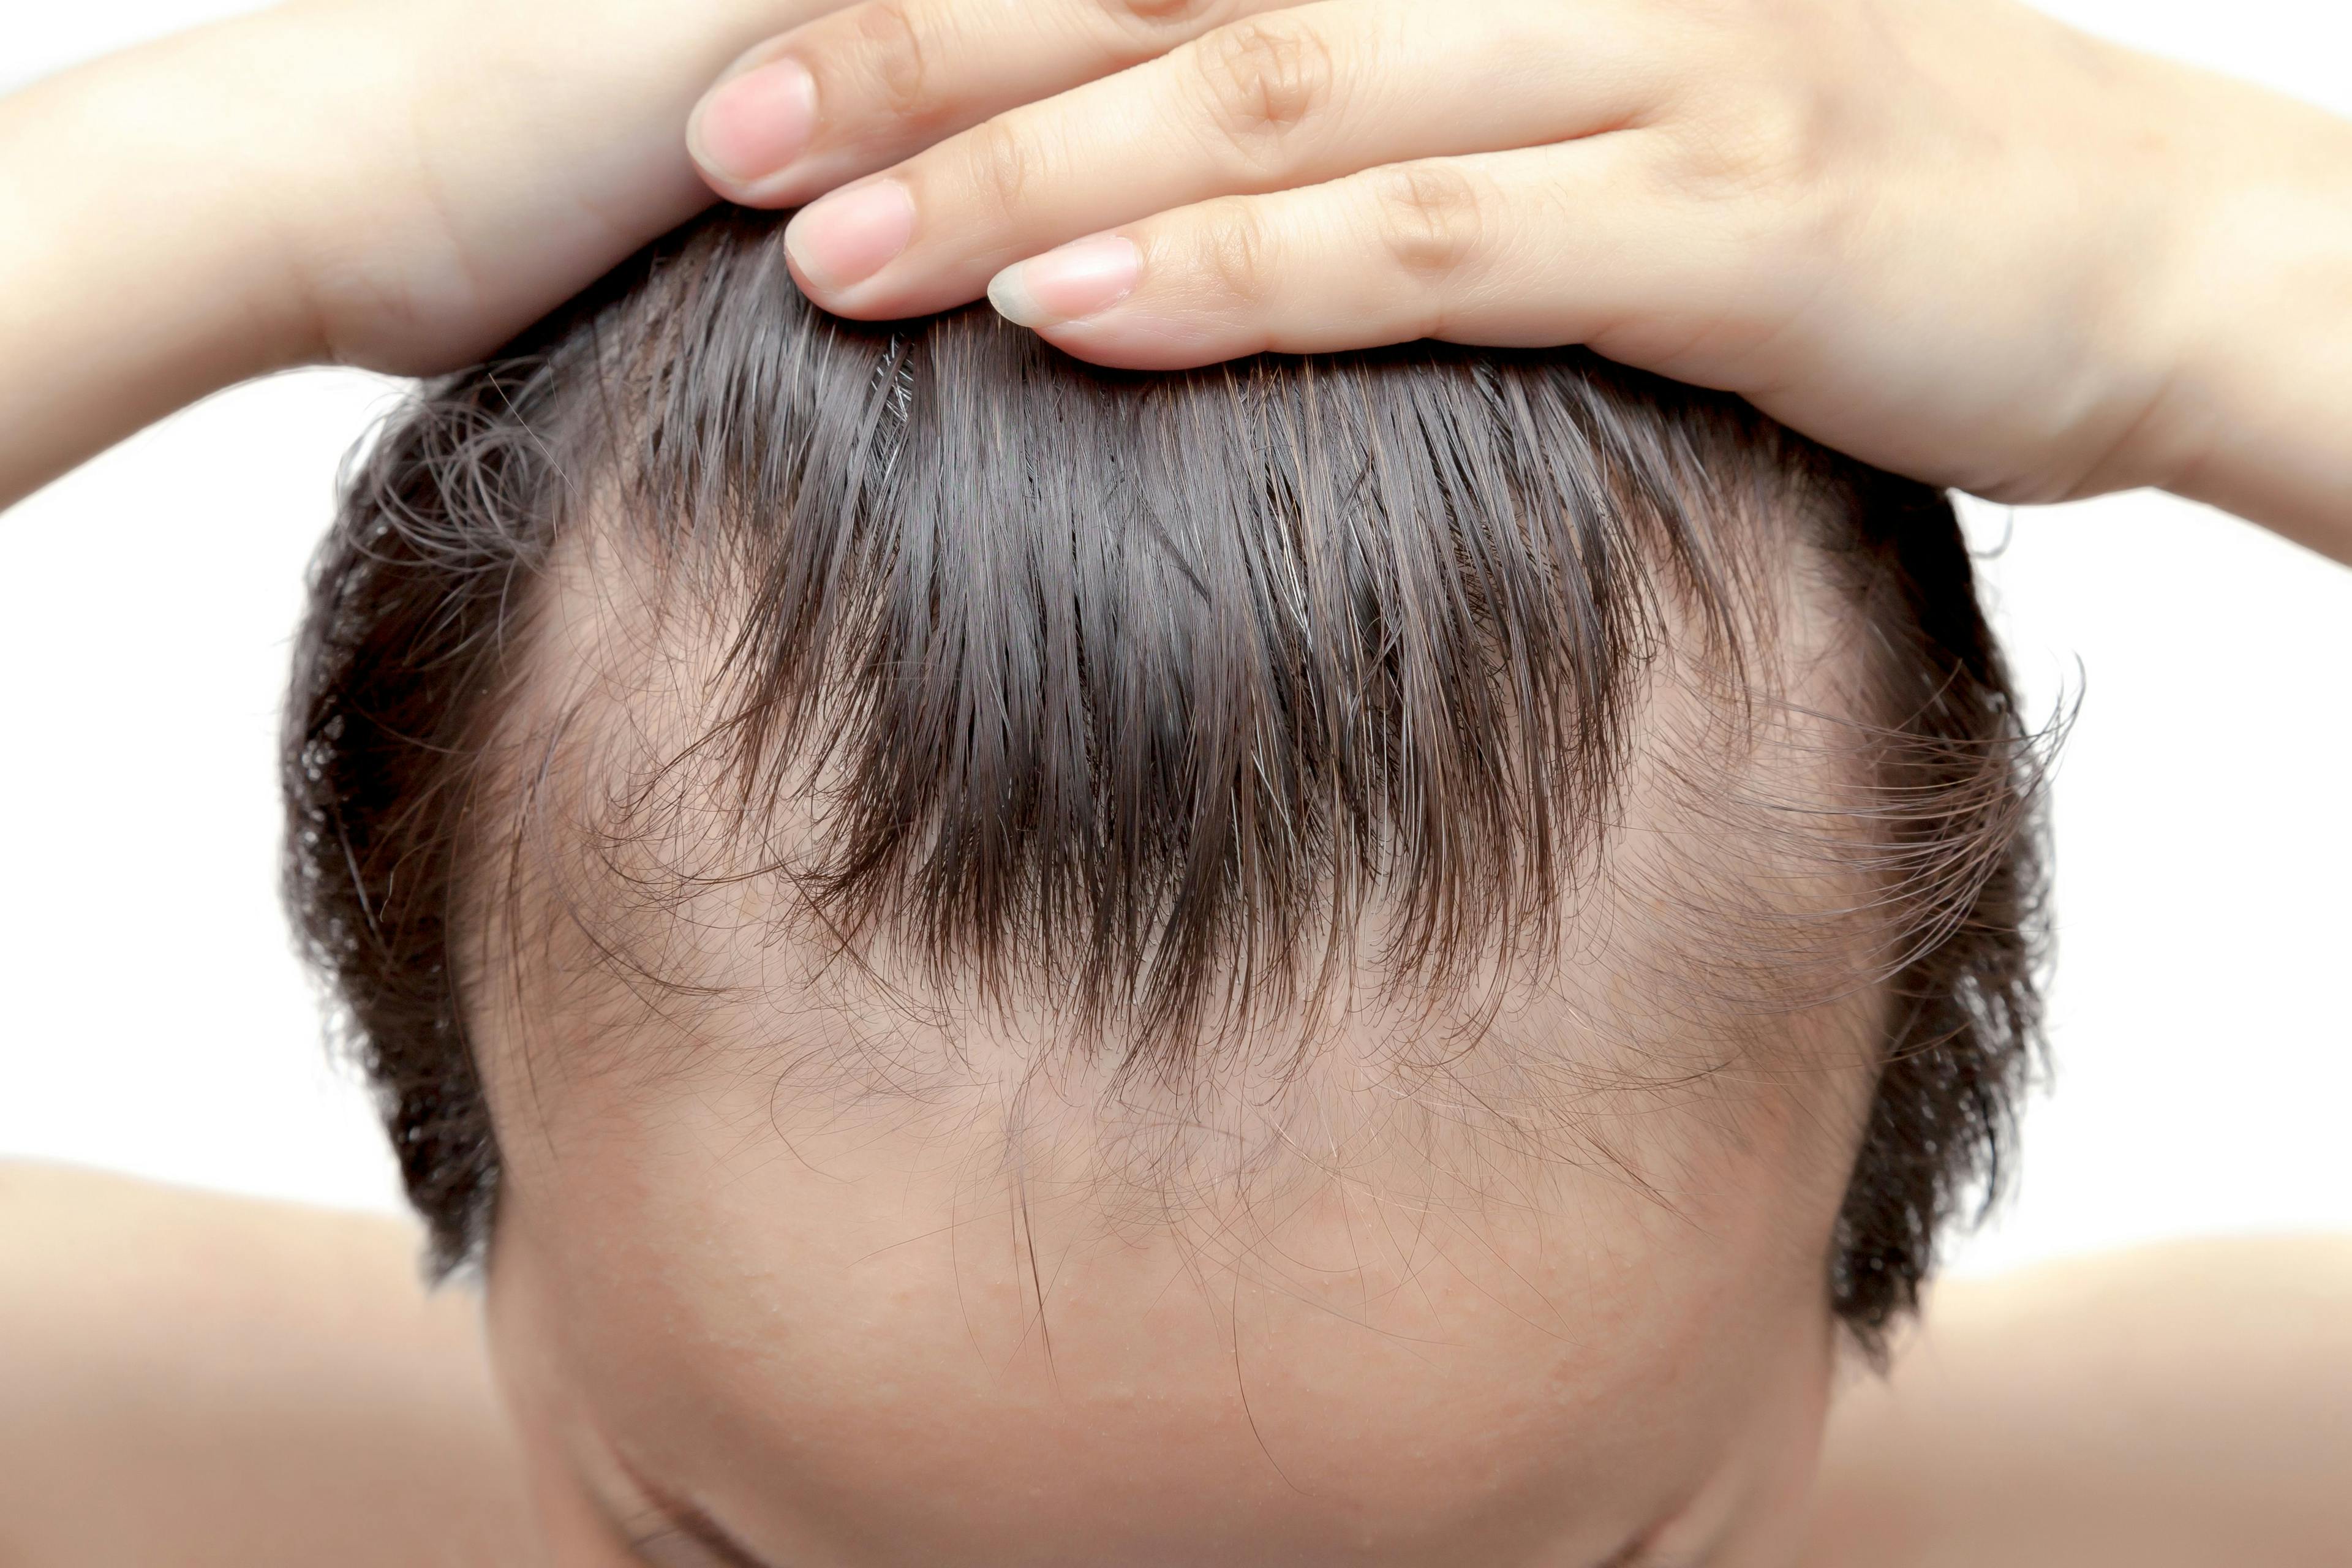 Amino Acid- Containing Supplement May Improve Clinical Efficacy of Hair Loss Treatments